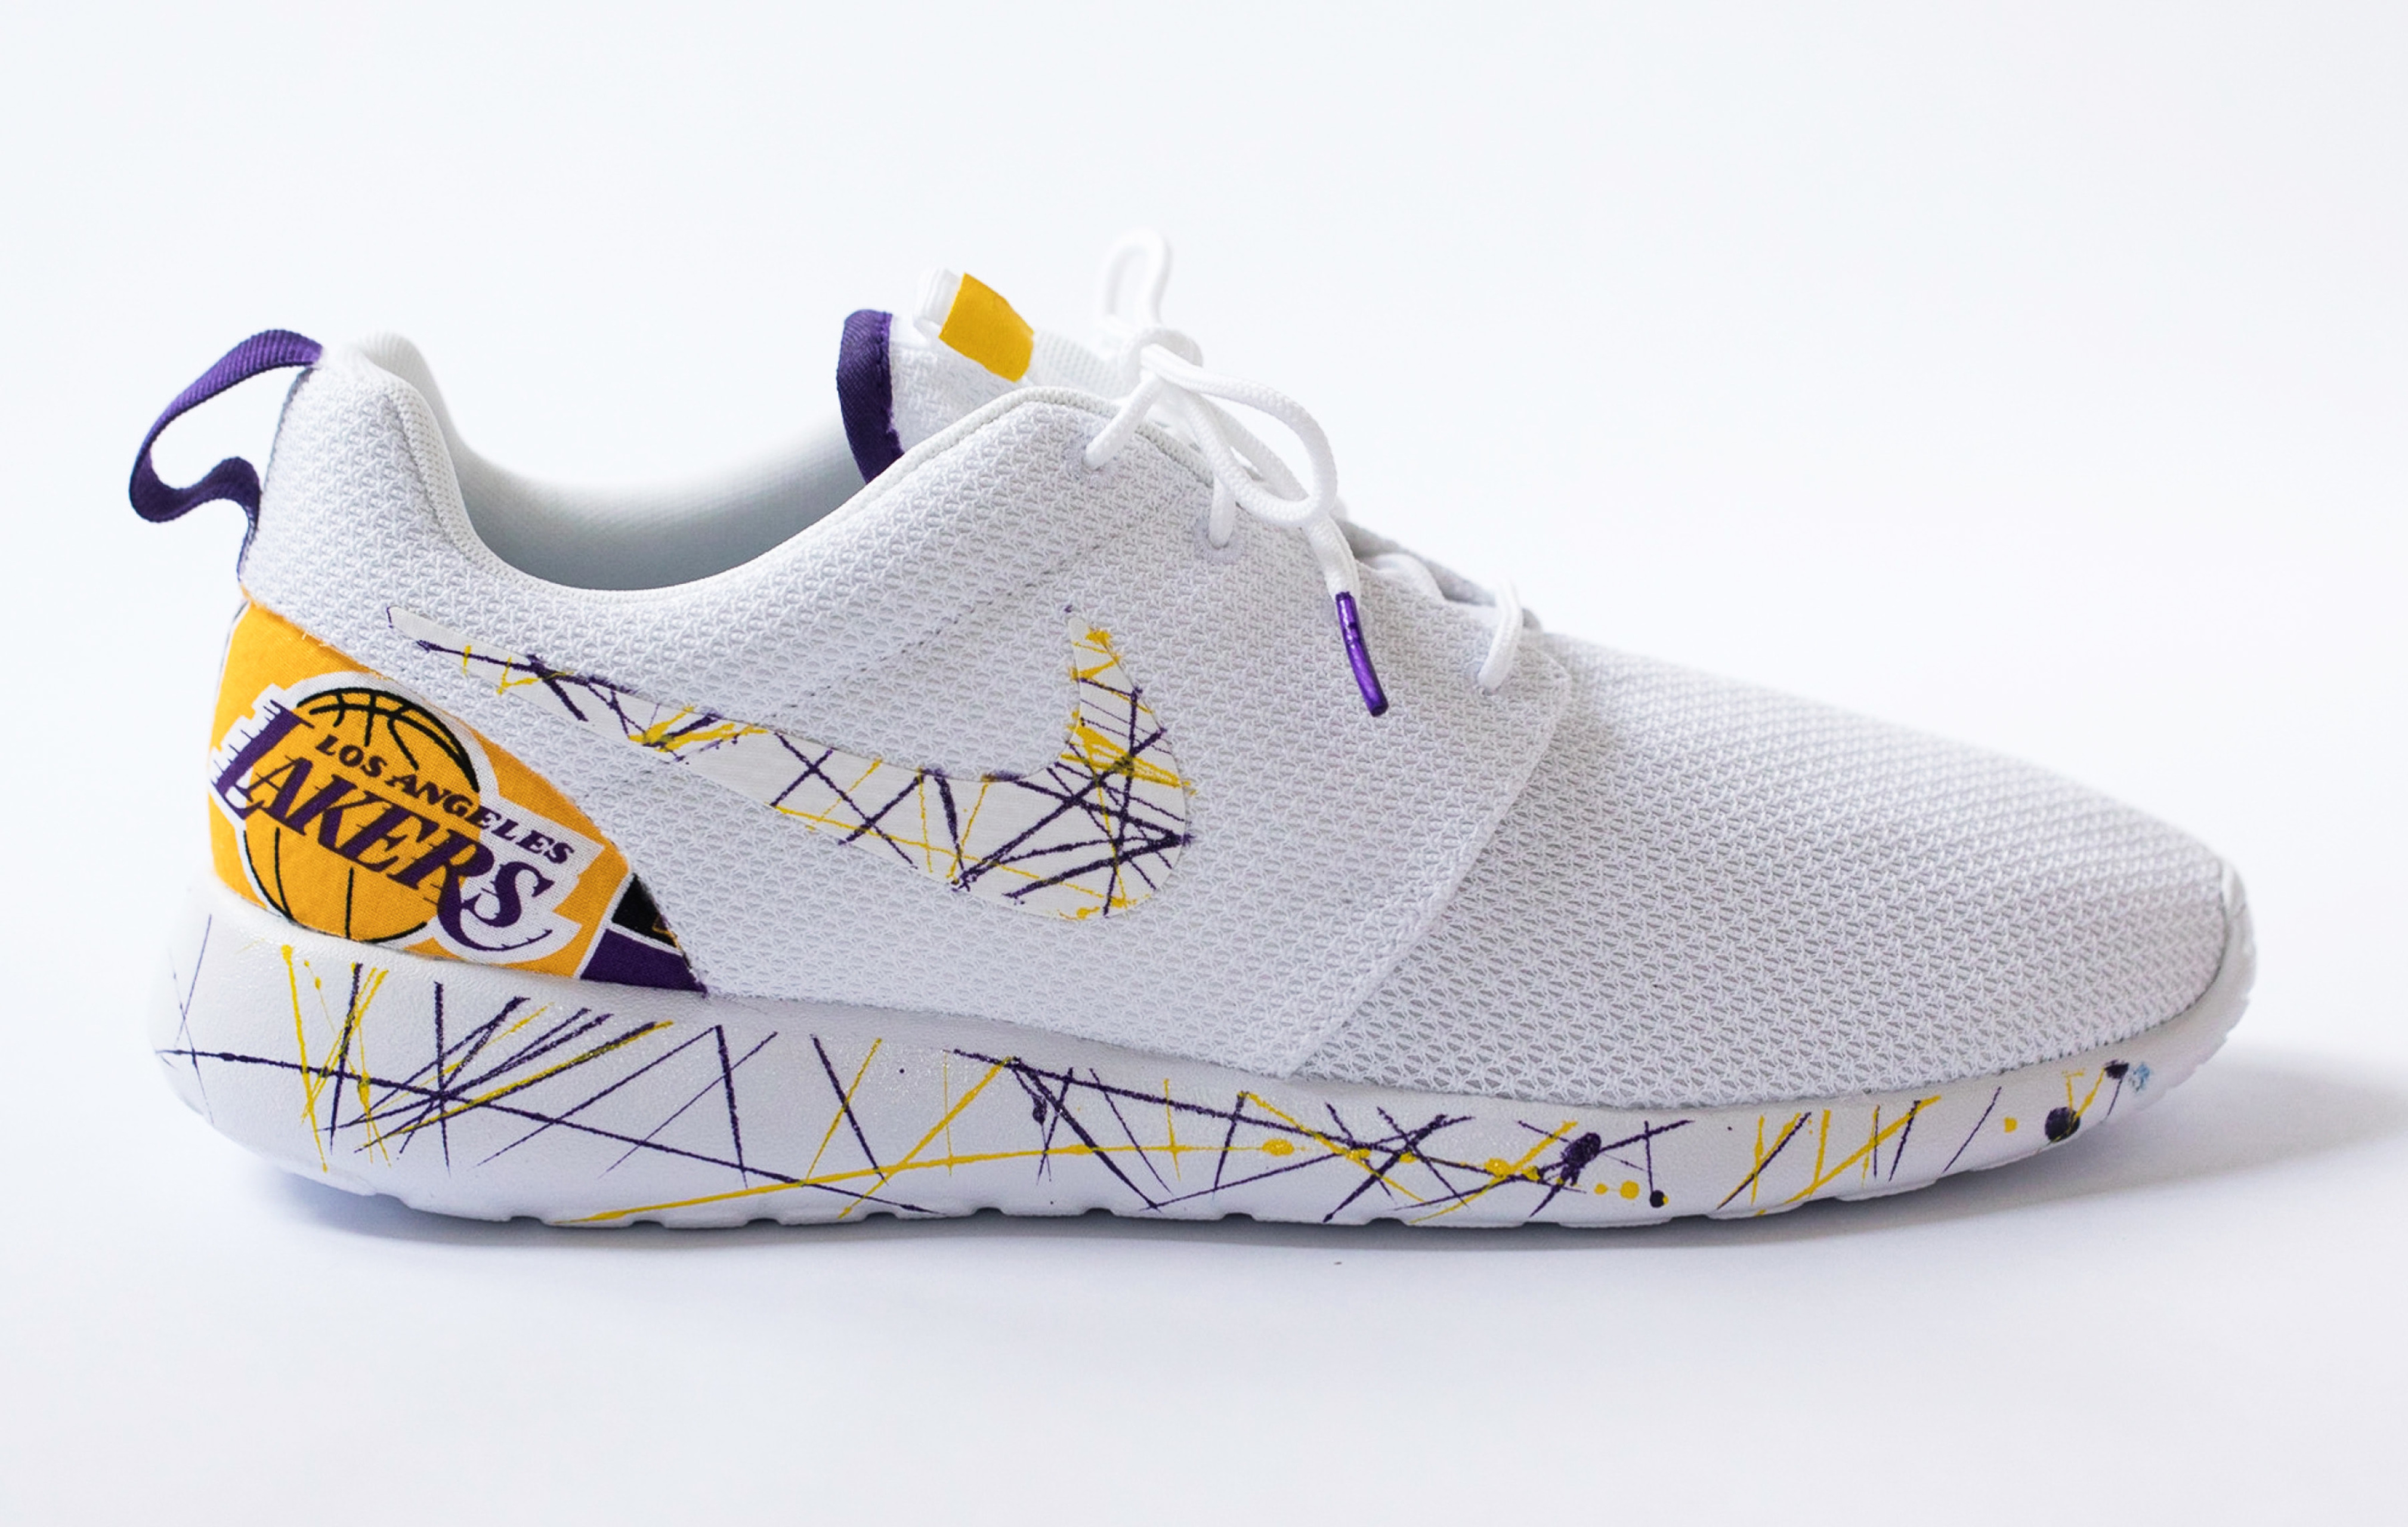 lakers tennis shoes